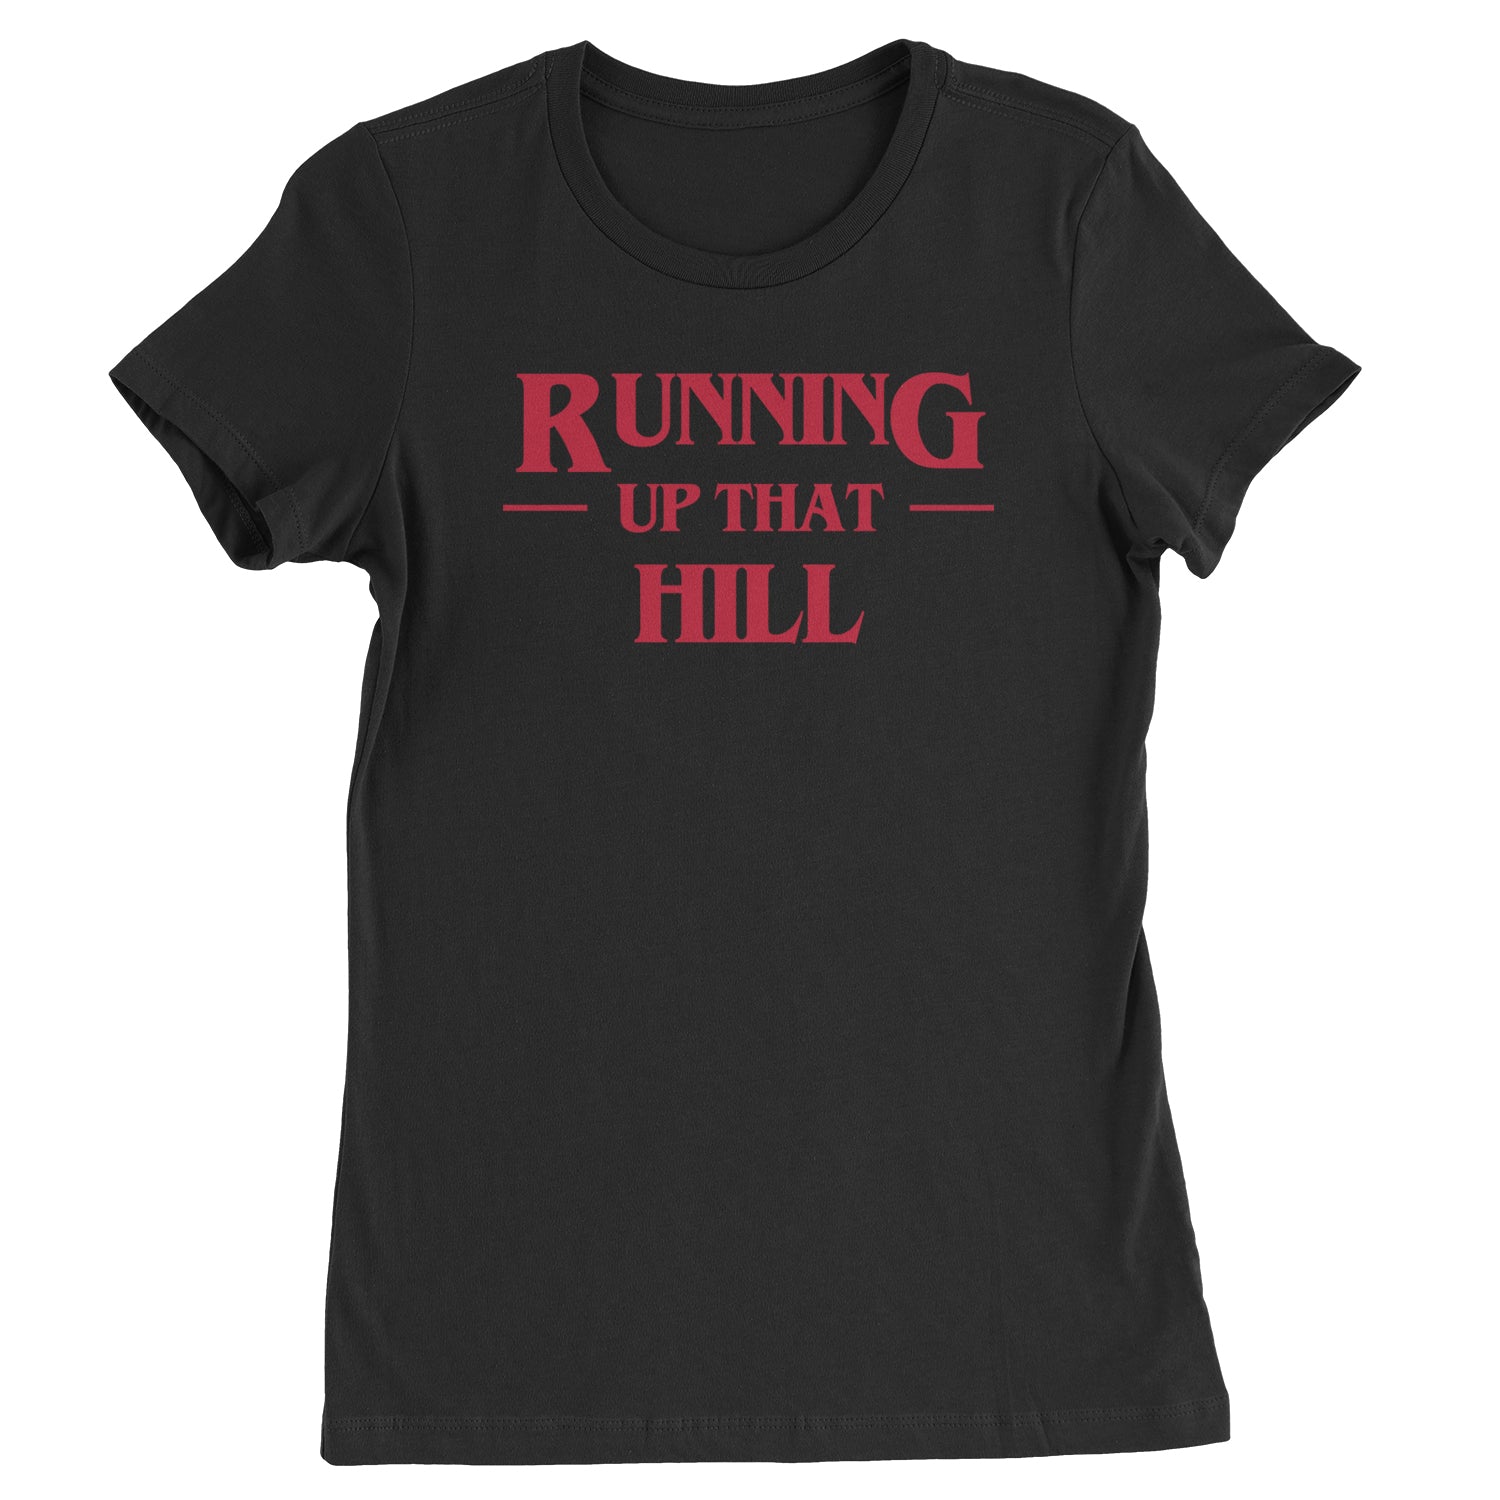 Running Up That Hill Womens T-shirt 4, don’t, eleven, four, friends, lie, season by Expression Tees